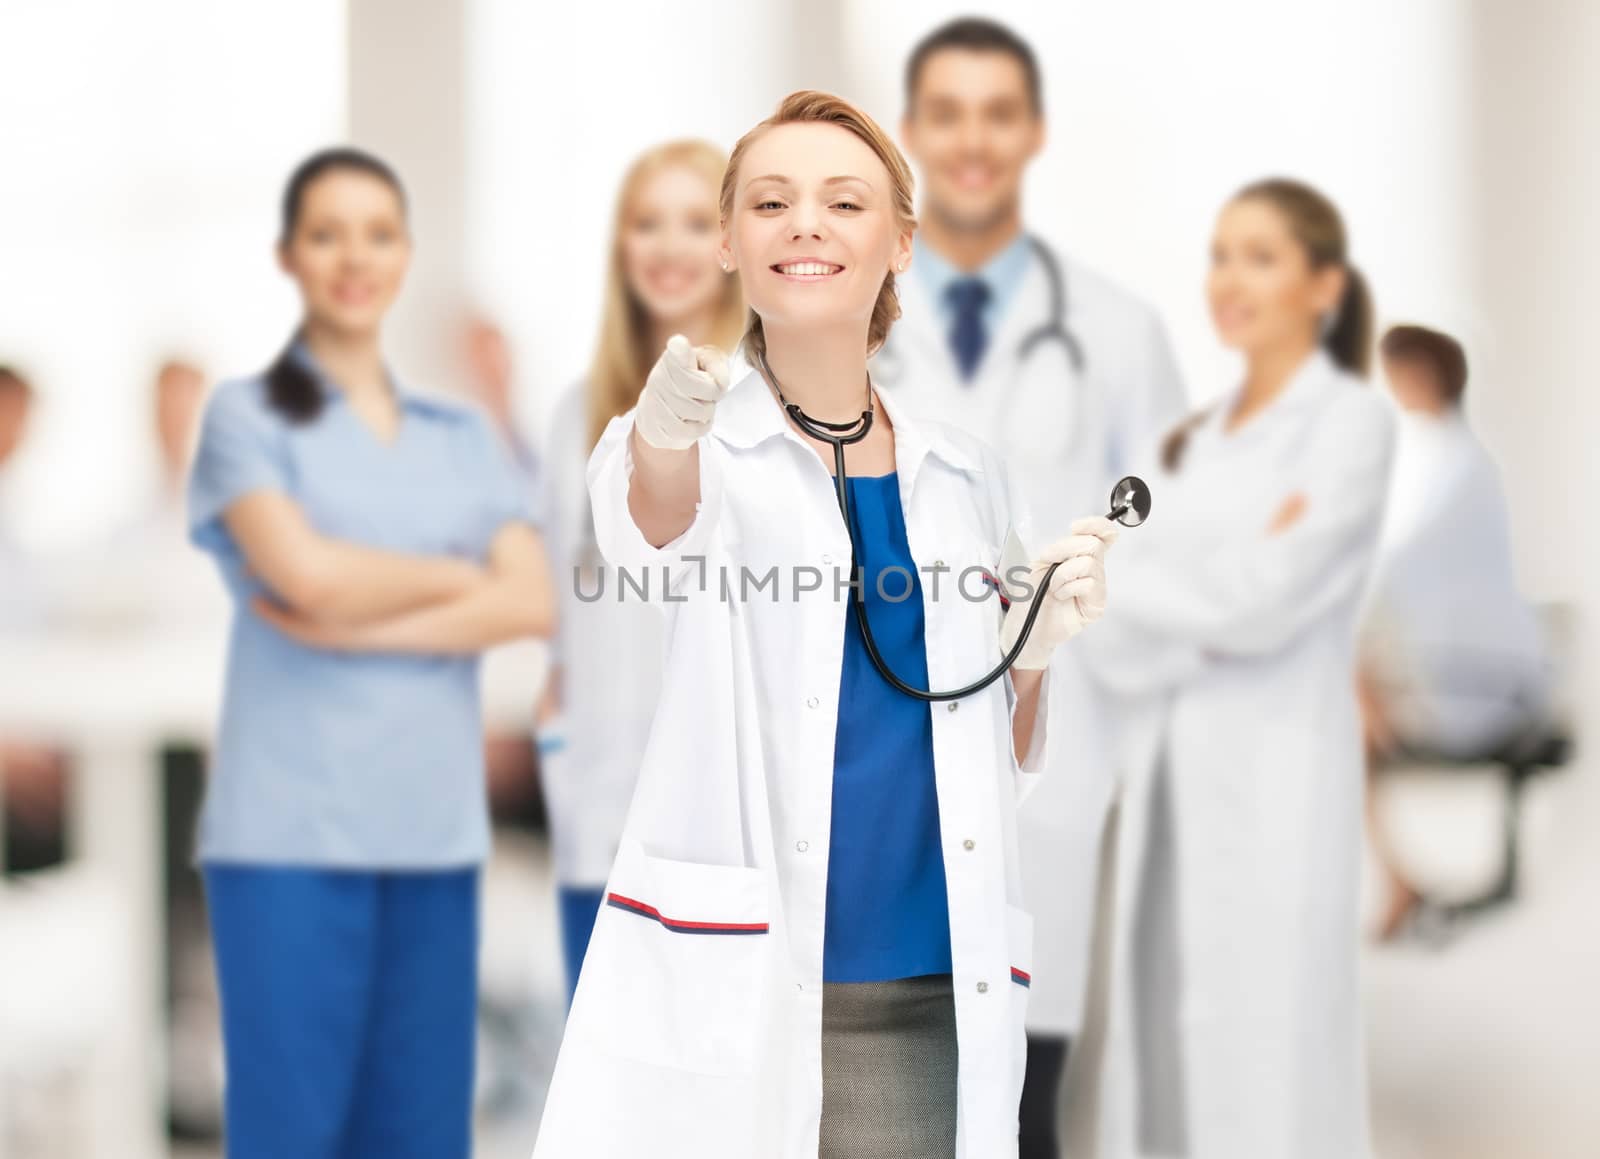 picture of attractive female doctor pointing her finger